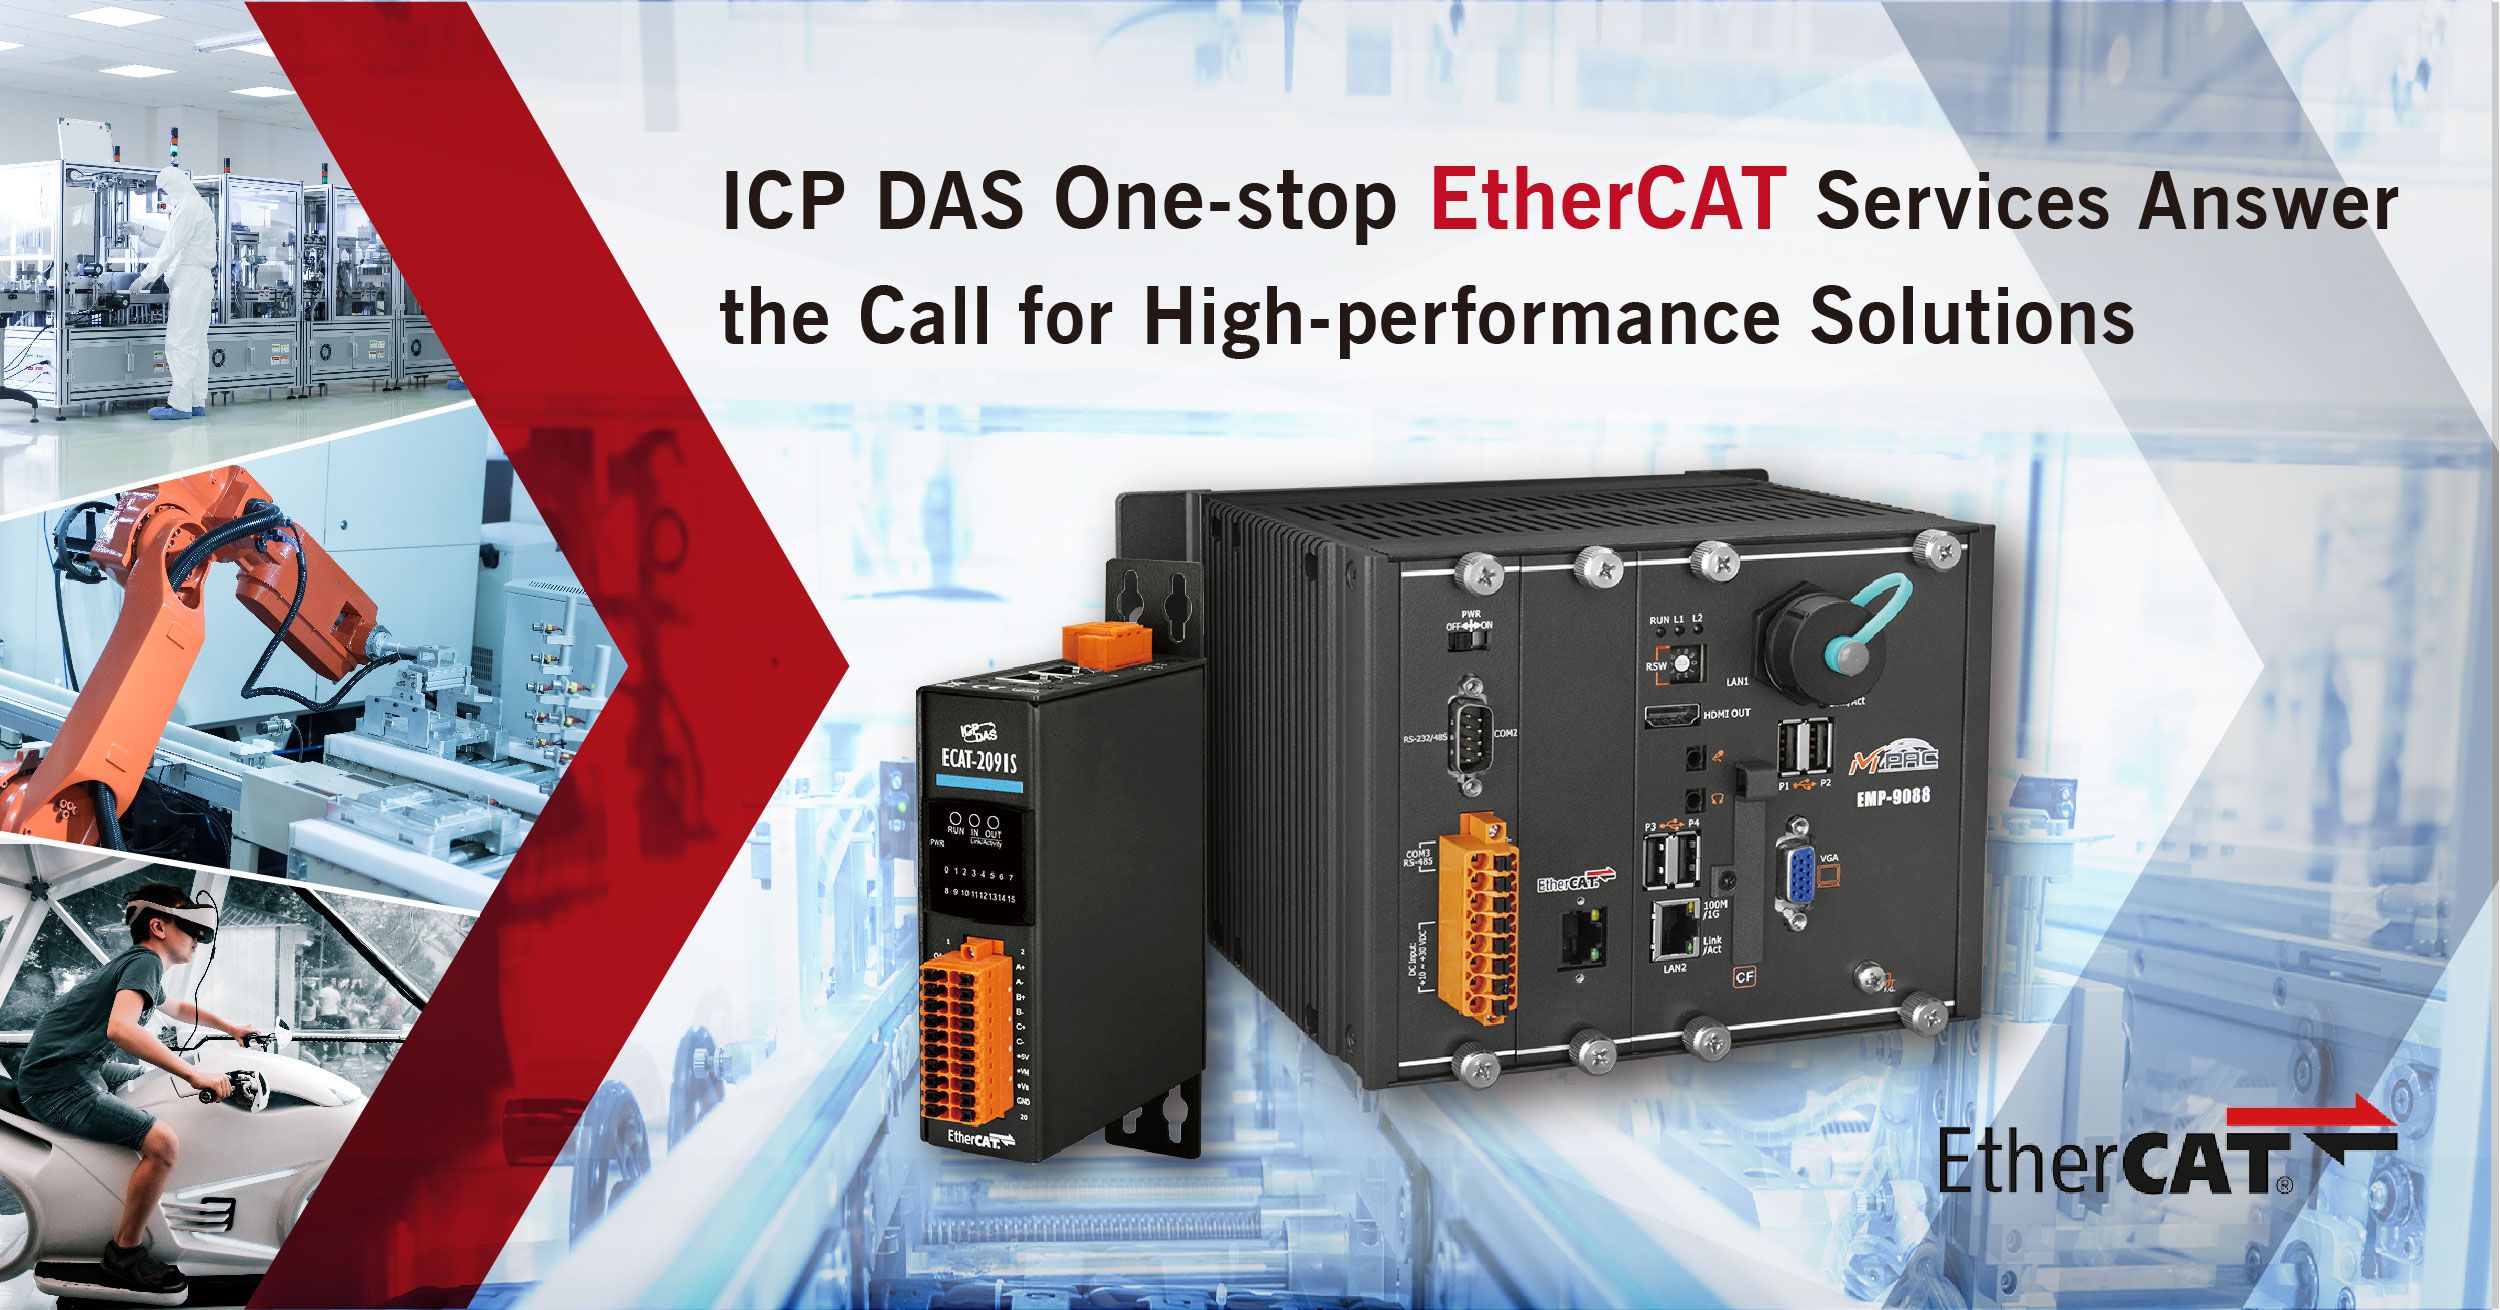 ICP DAS One-stop EtherCAT Services Answer the Call for High-performance Solutions